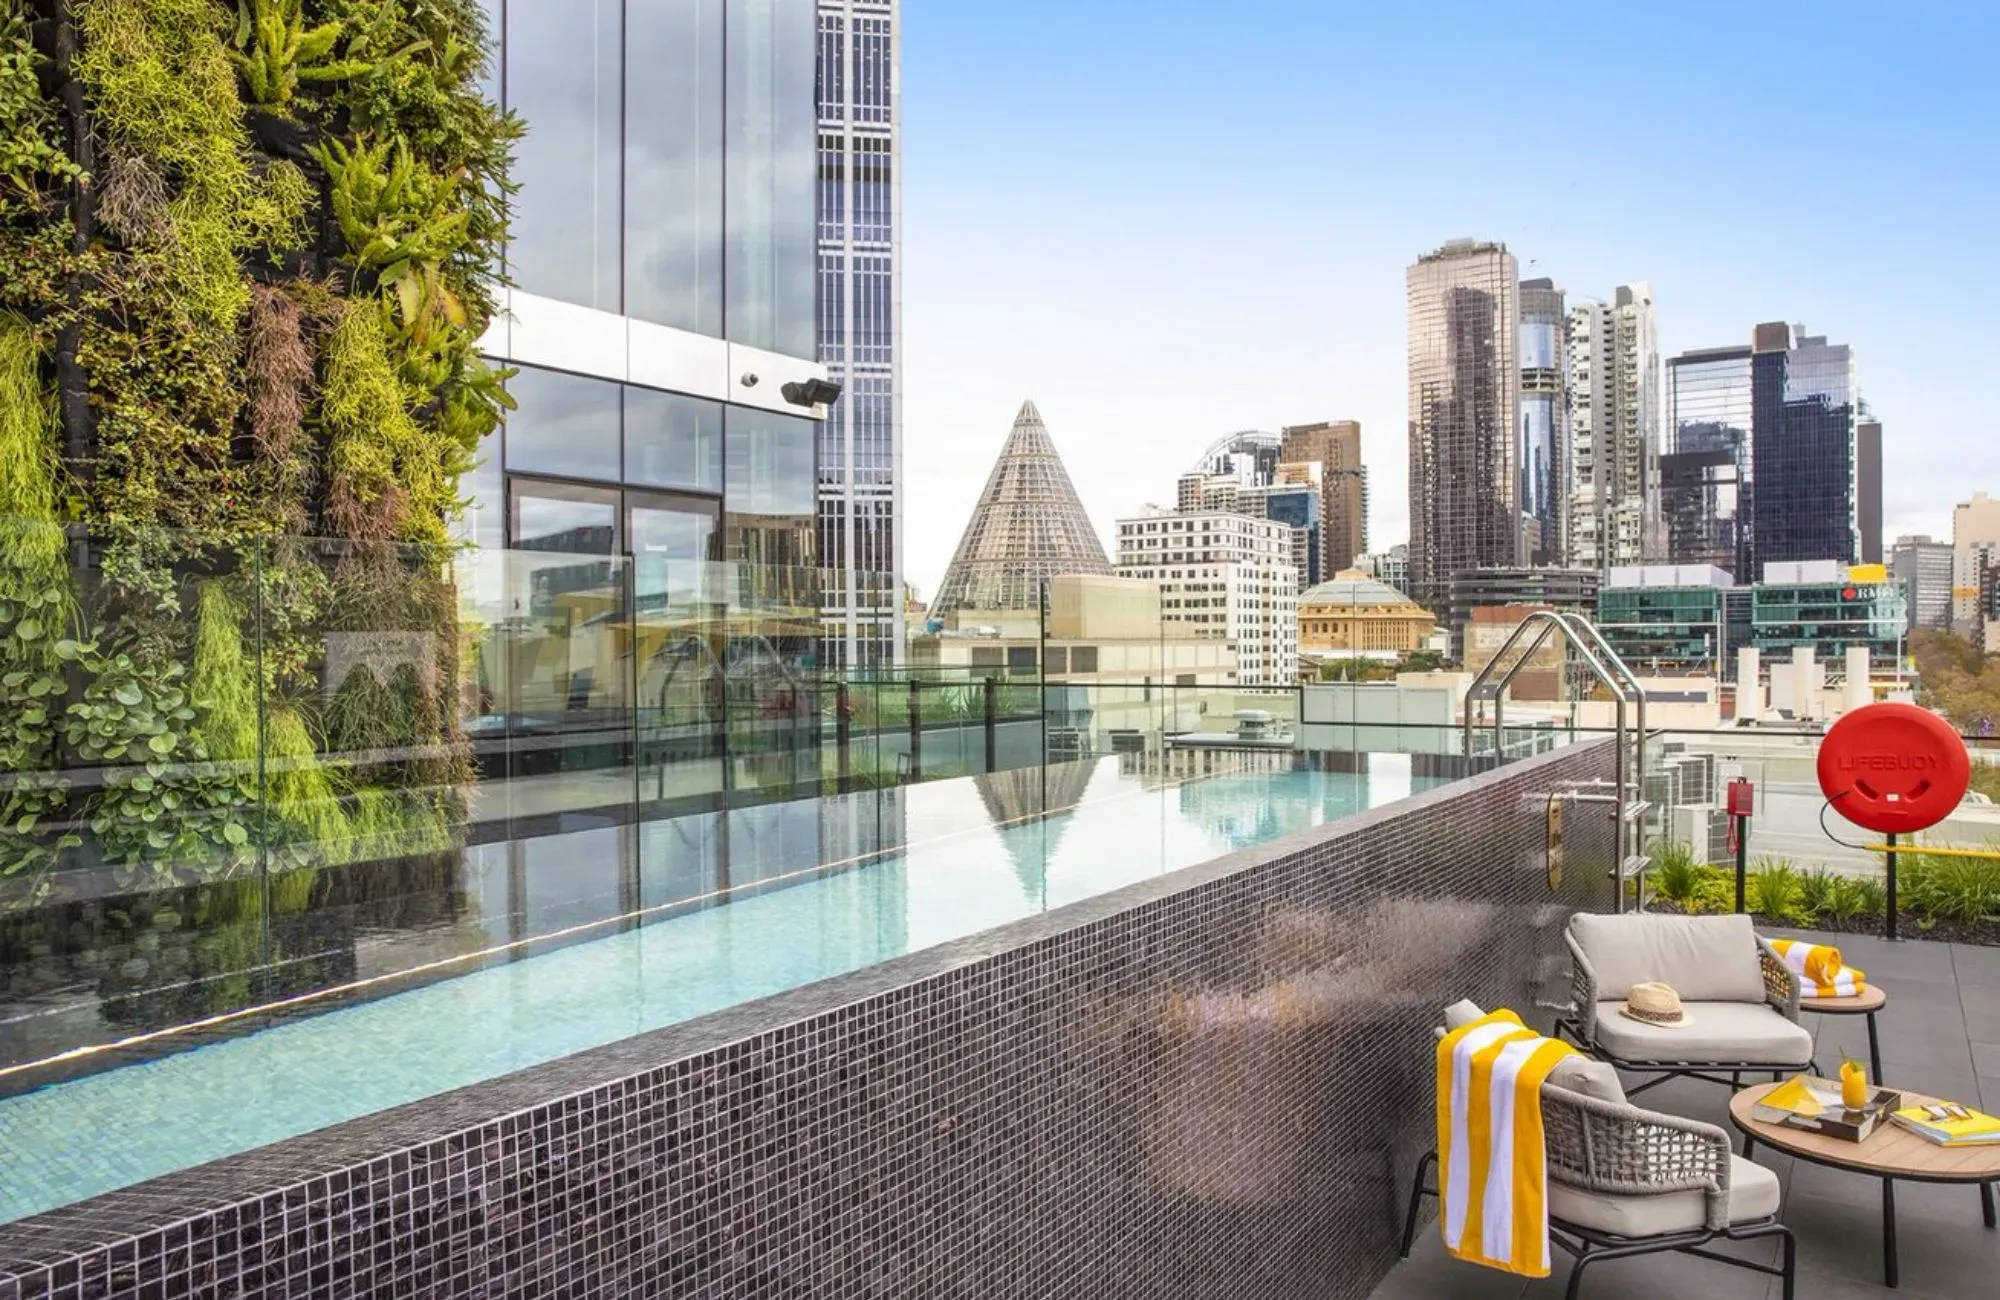 Voco Melbourne Central by IHG Hotels & Resorts. Rooftop pool, featuring panoramic city views